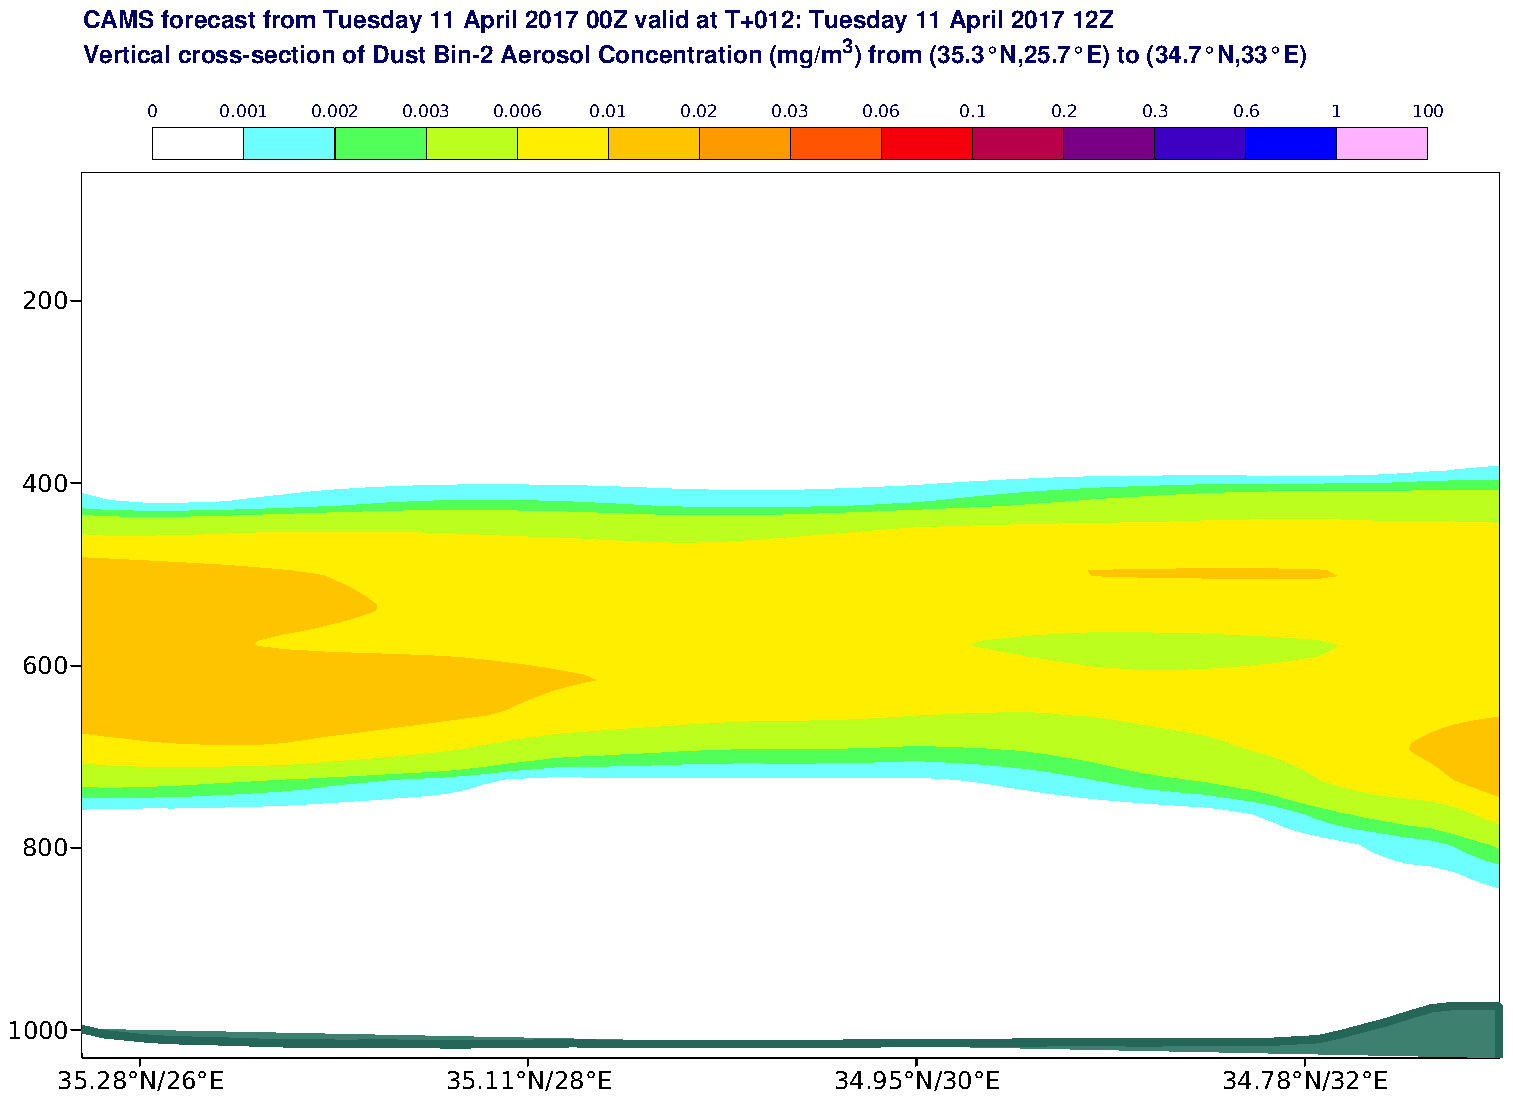 Vertical cross-section of Dust Bin-2 Aerosol Concentration (mg/m3) valid at T12 - 2017-04-11 12:00